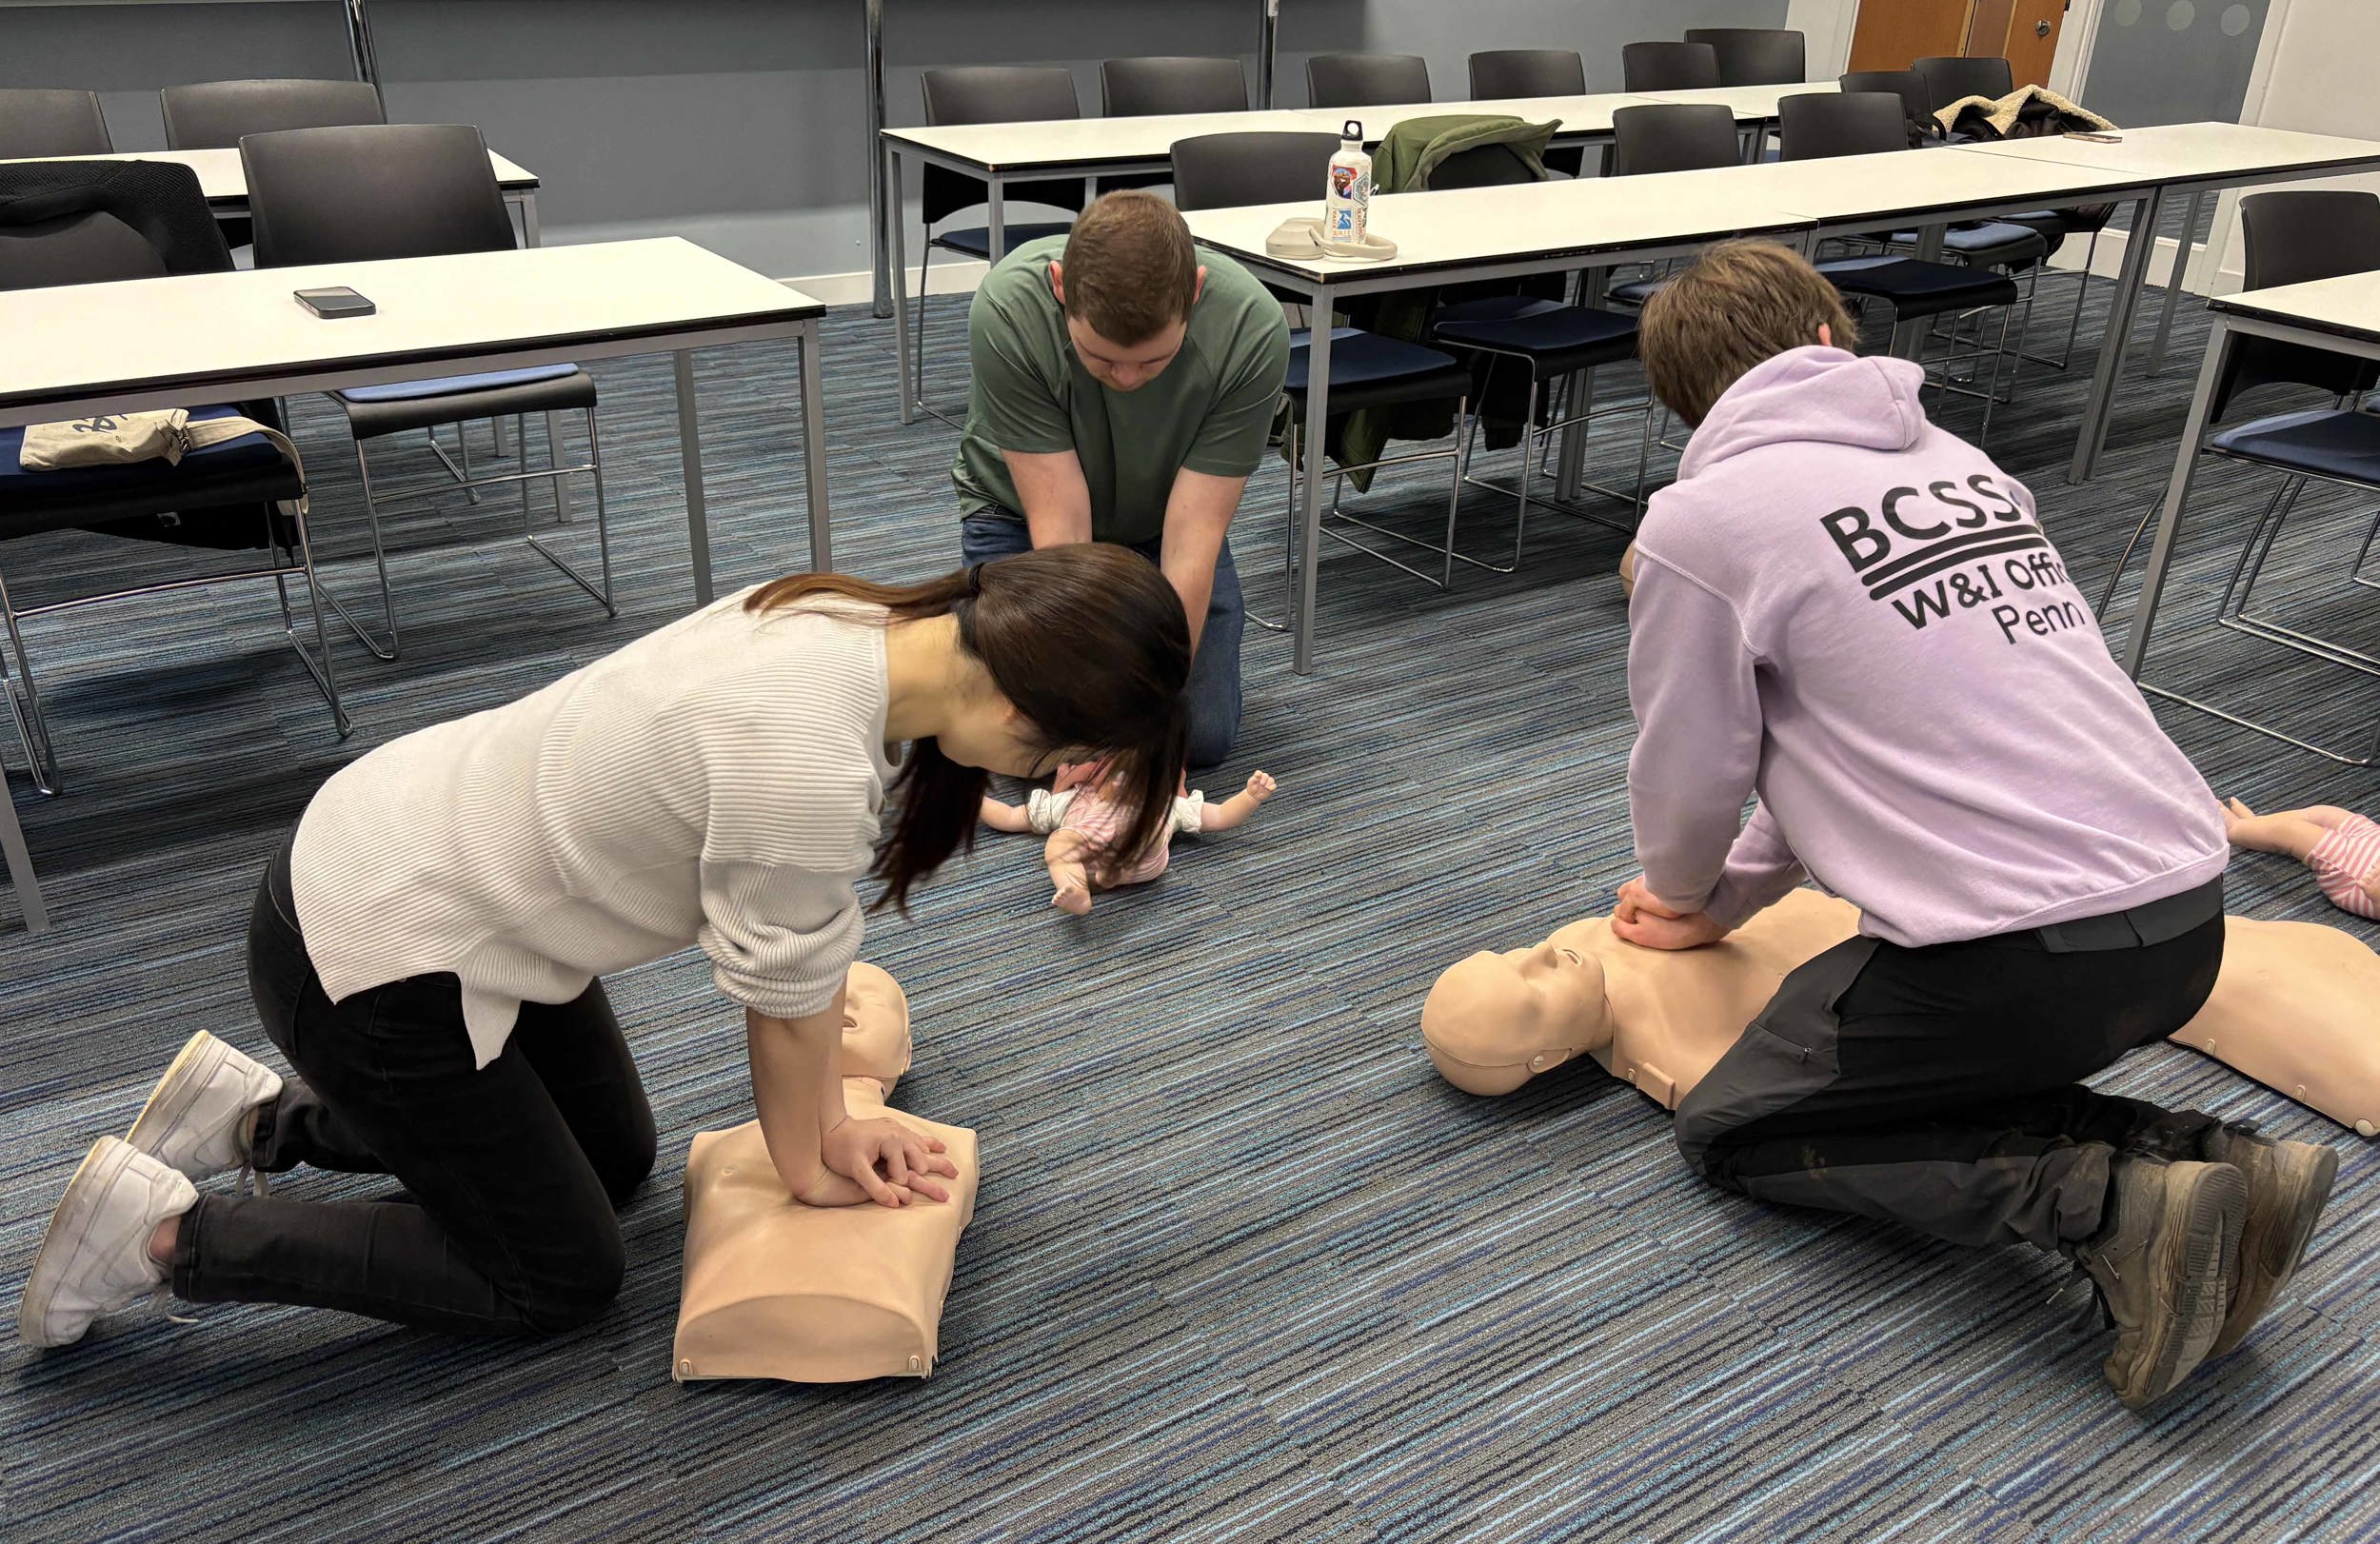 Students from University of Bath taking part in CPR training